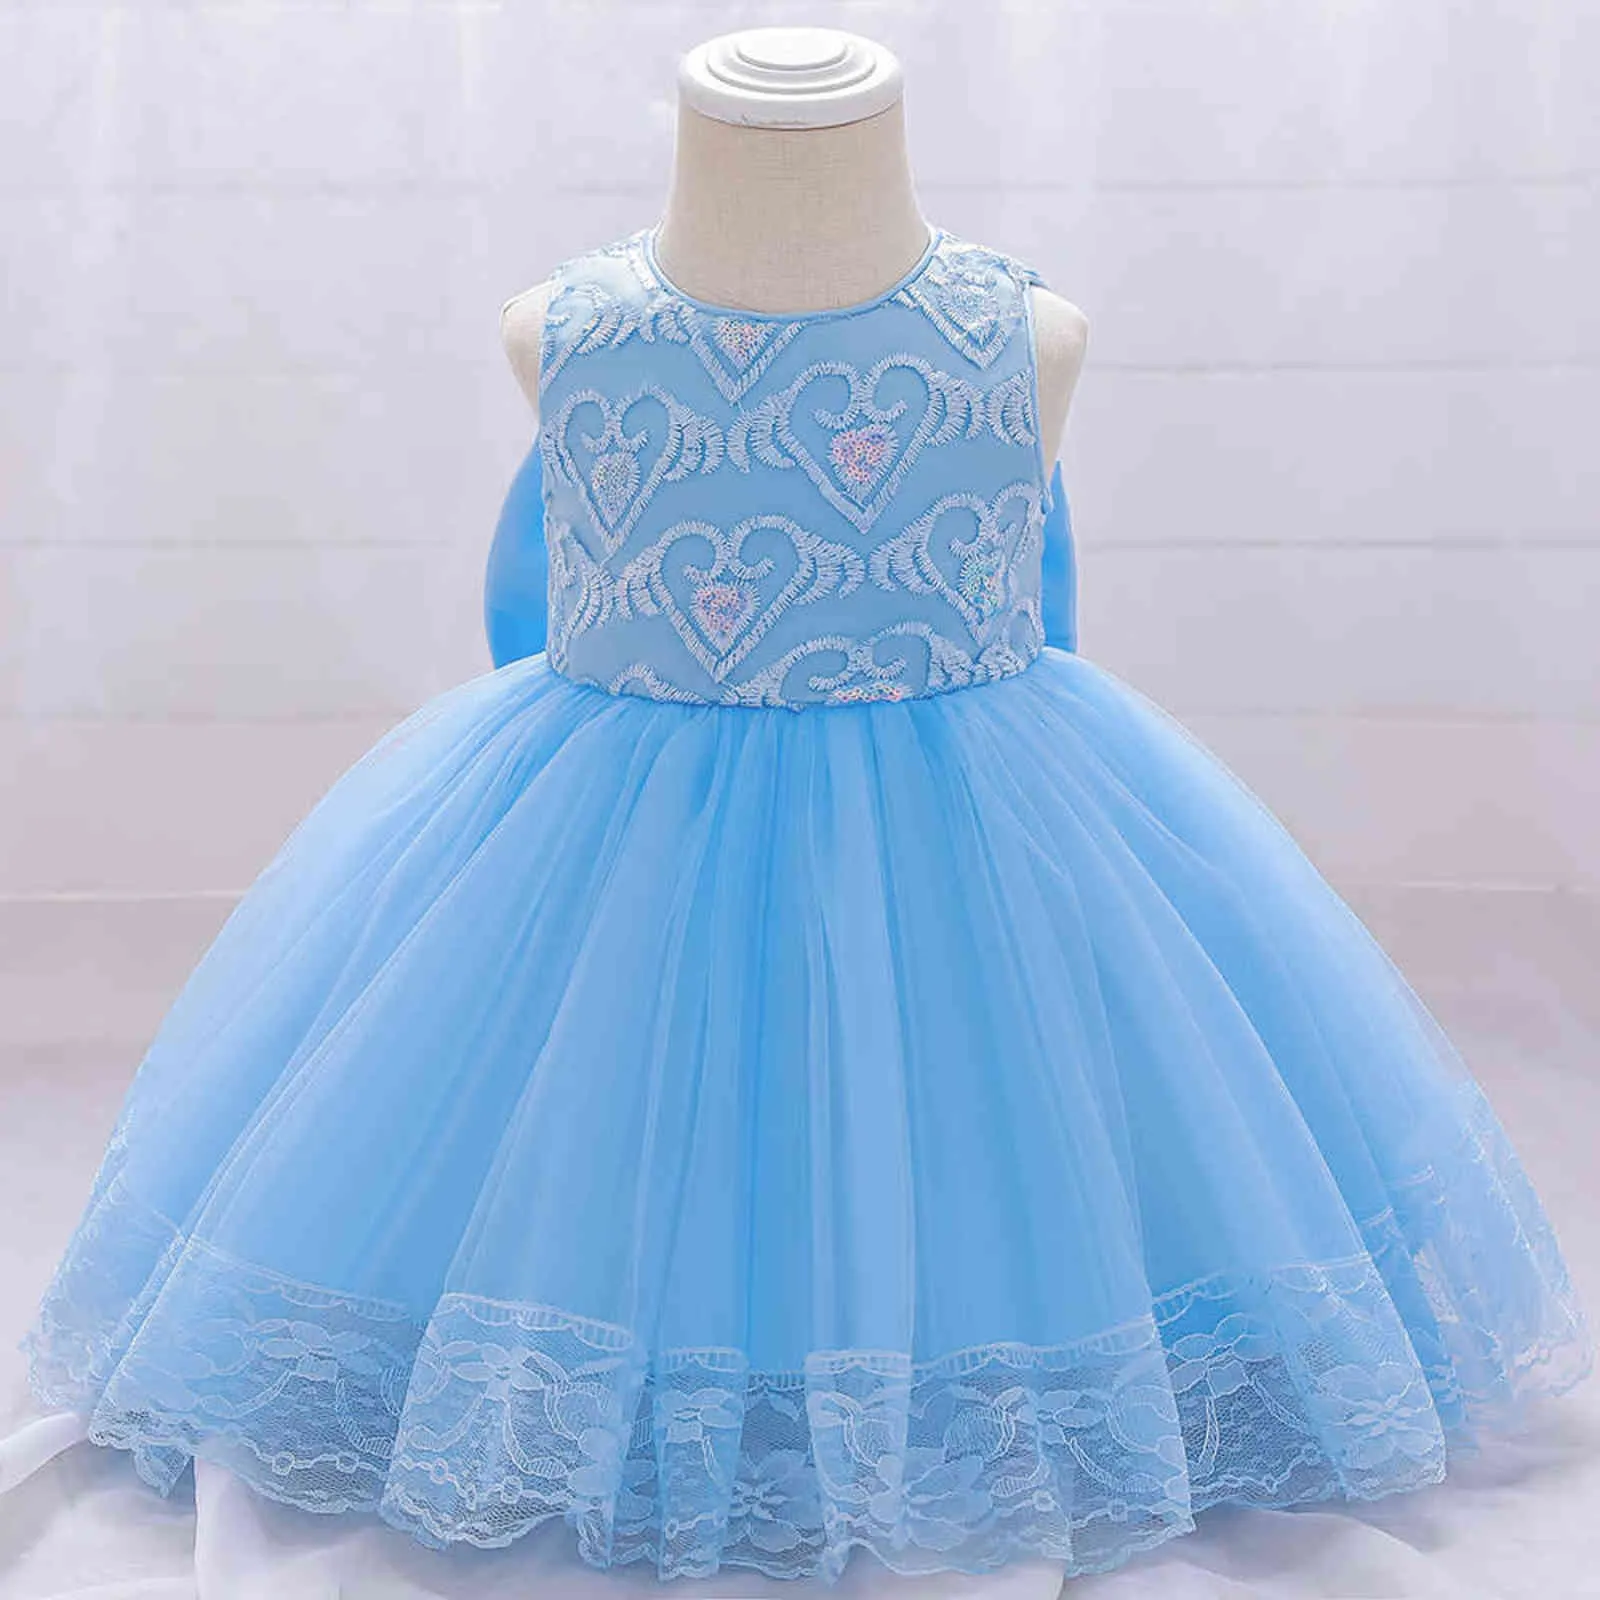 Infant Baby Girl Dress Clothes Baby Christening Gown First 1st Birthday Dress Party Princess Dress For Girl Summer Dresses G1129